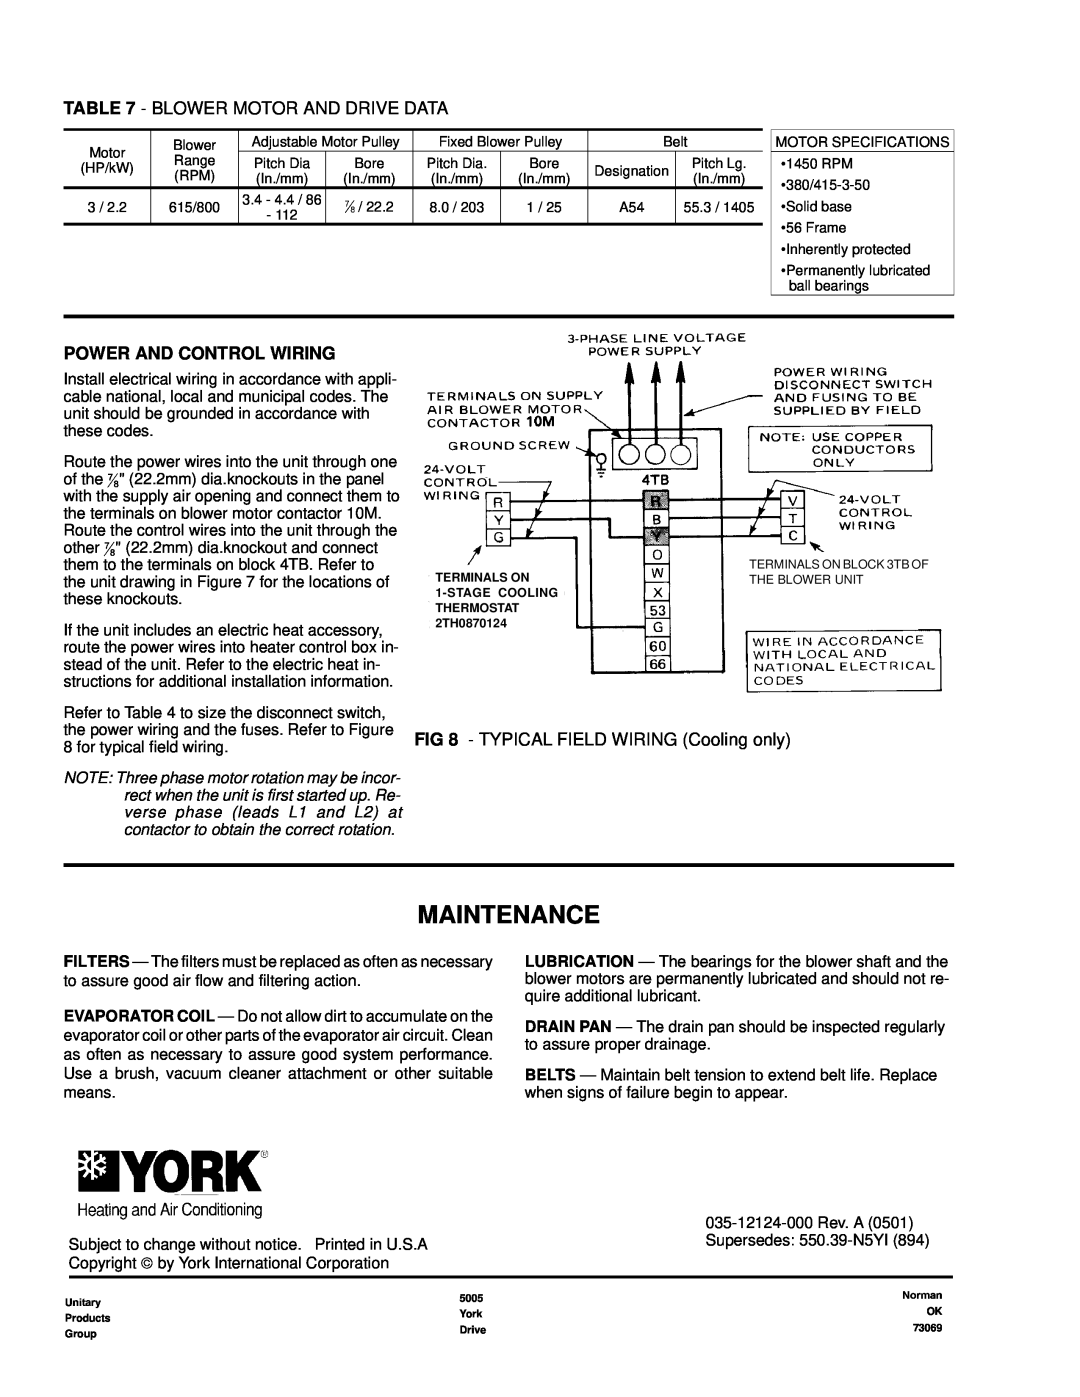 York K3EU180A50 Maintenance, Blower Motor And Drive Data, Power And Control Wiring, TYPICAL FIELD WIRING Cooling only 